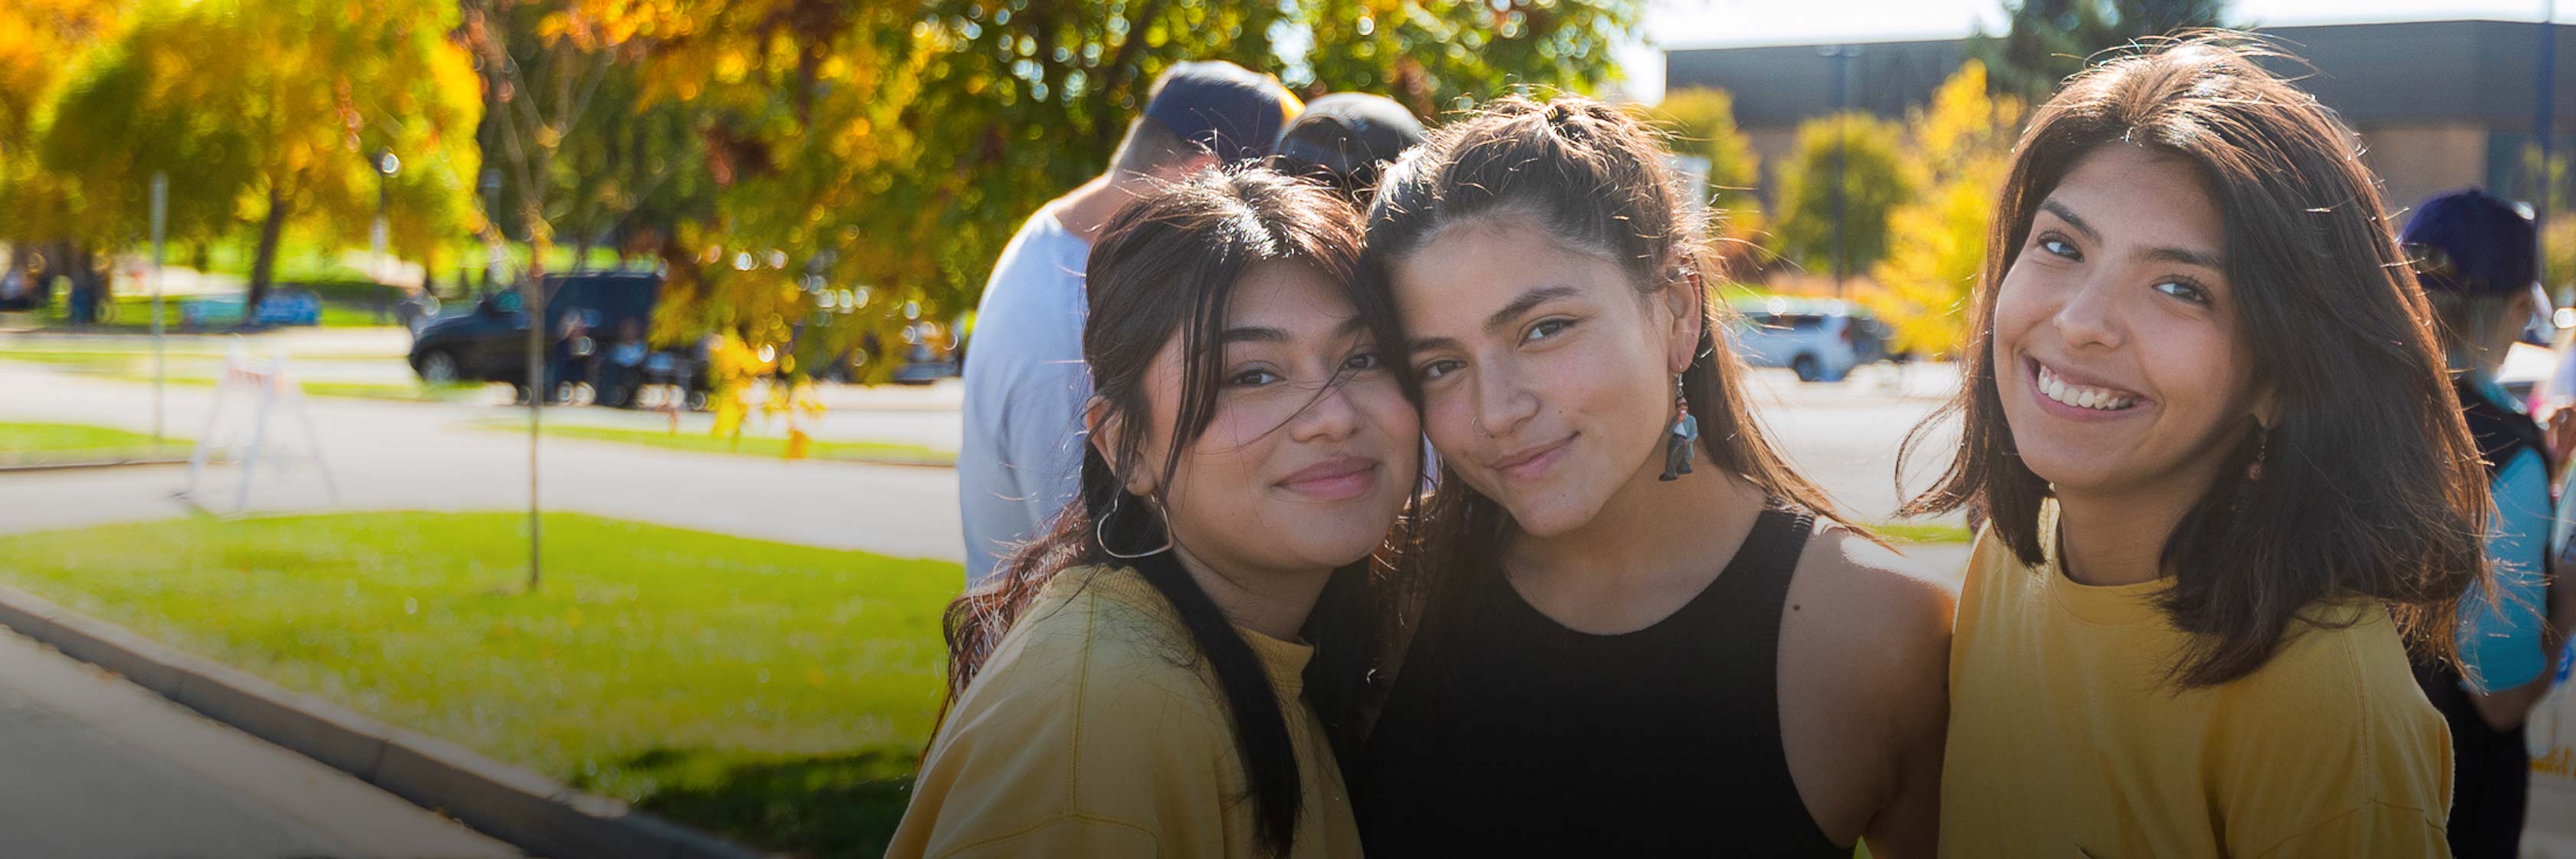 3 latina students smiling during an event.